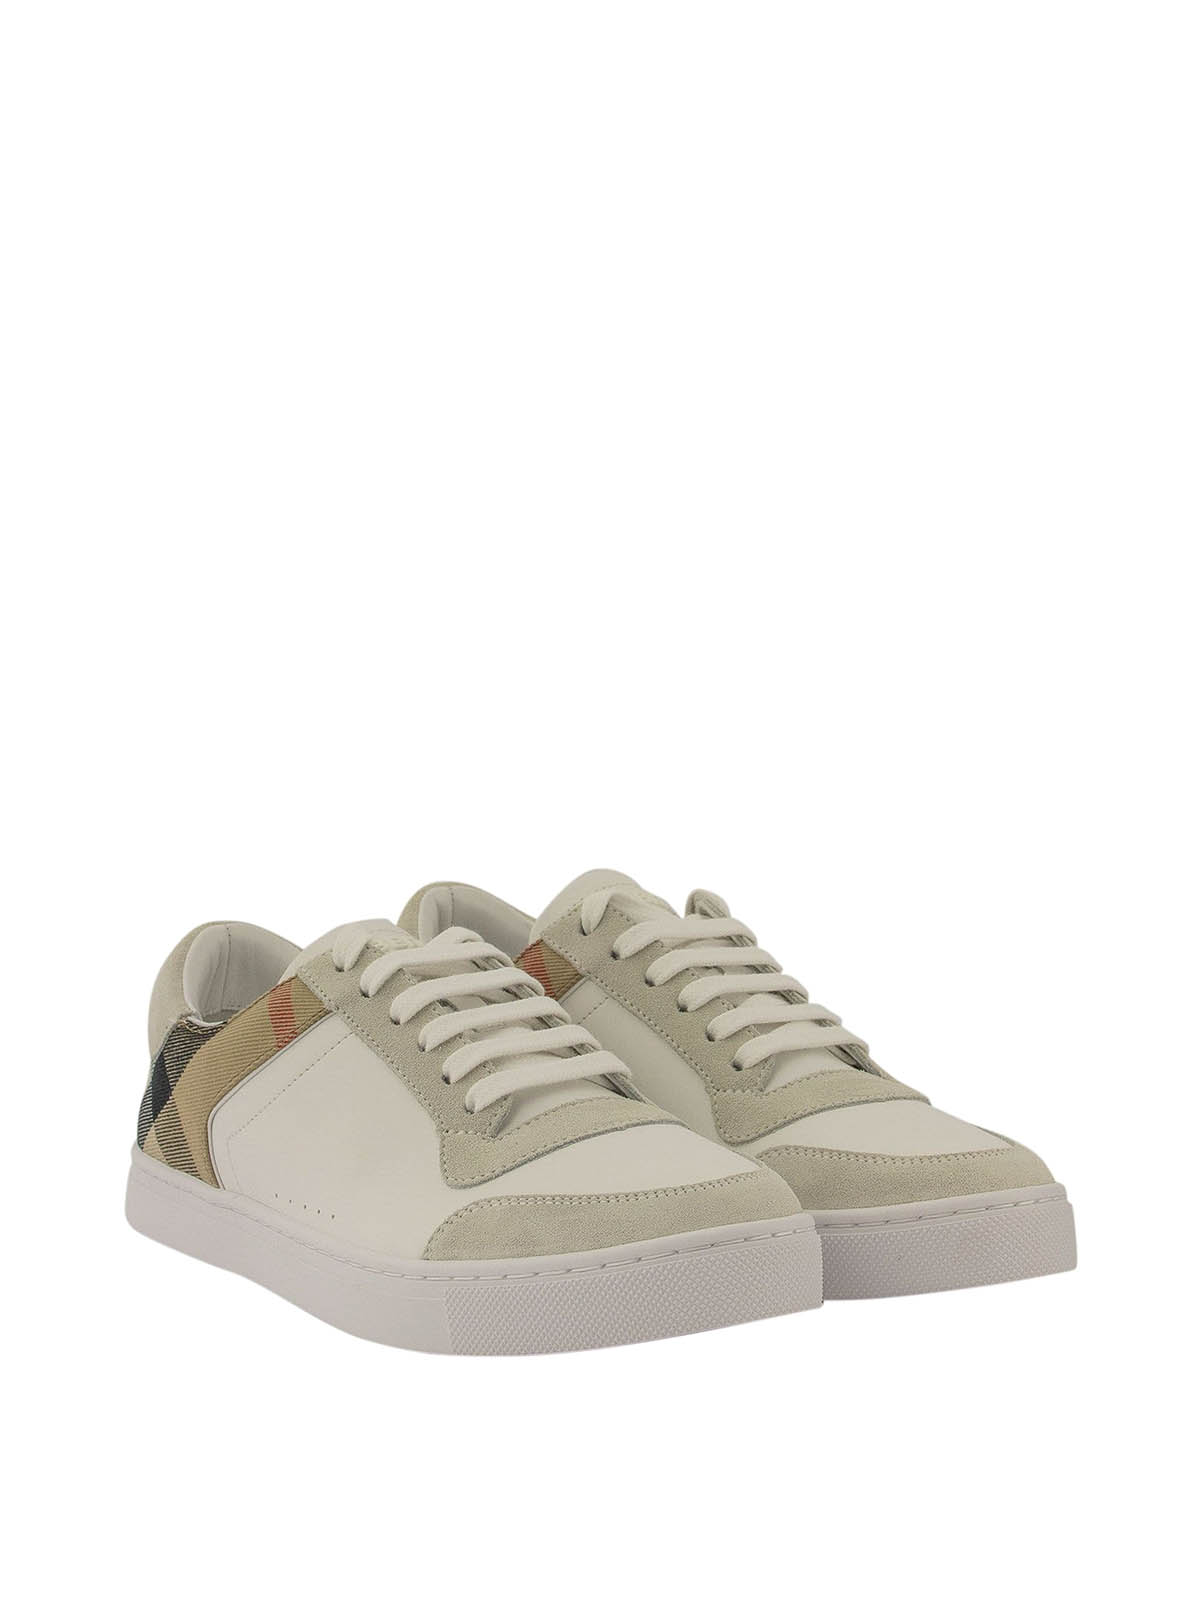 burberry house check trainers